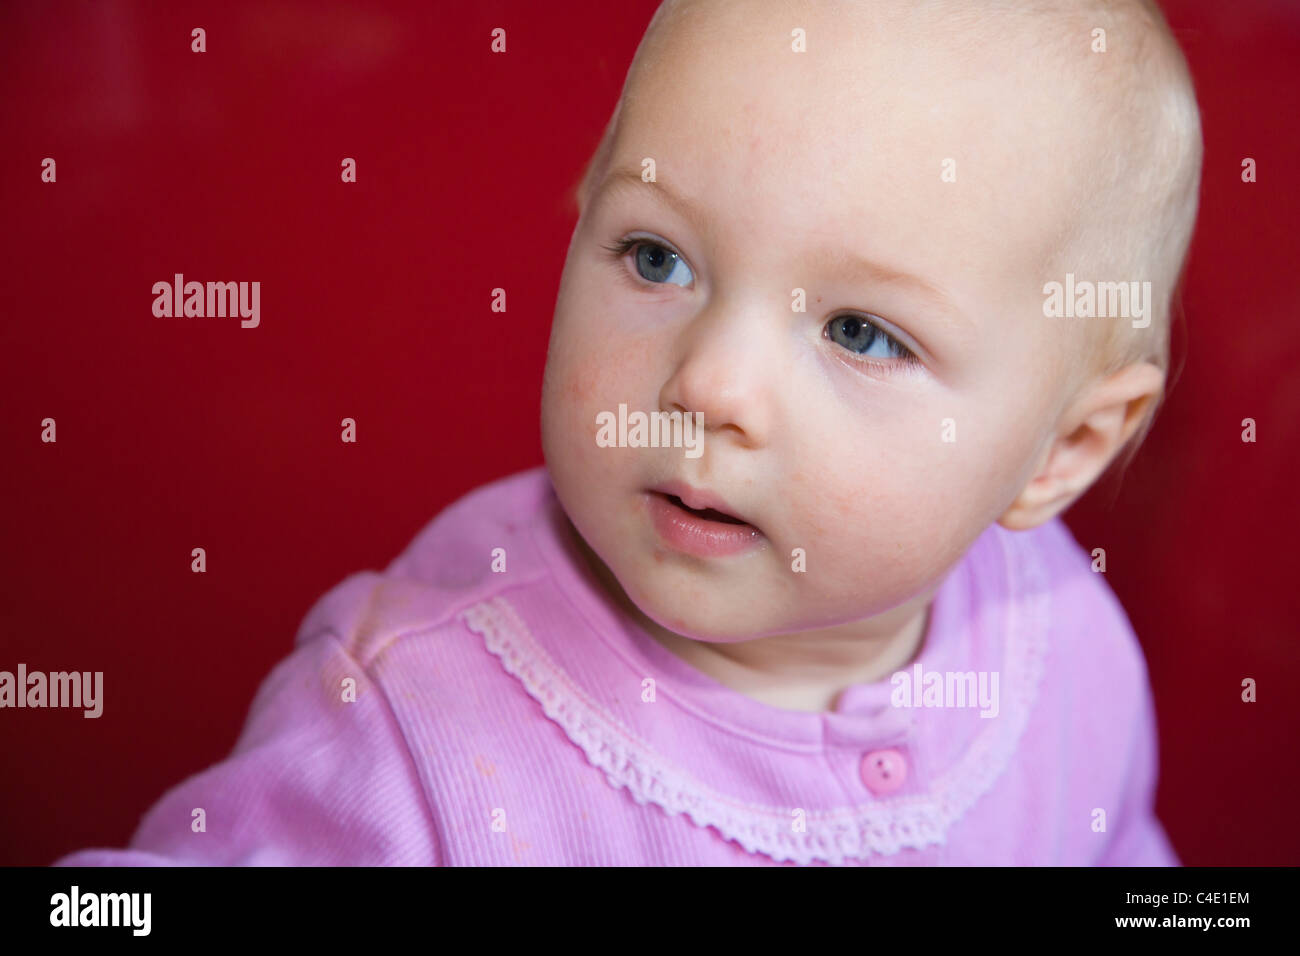 10 month old baby girl Stock Photo